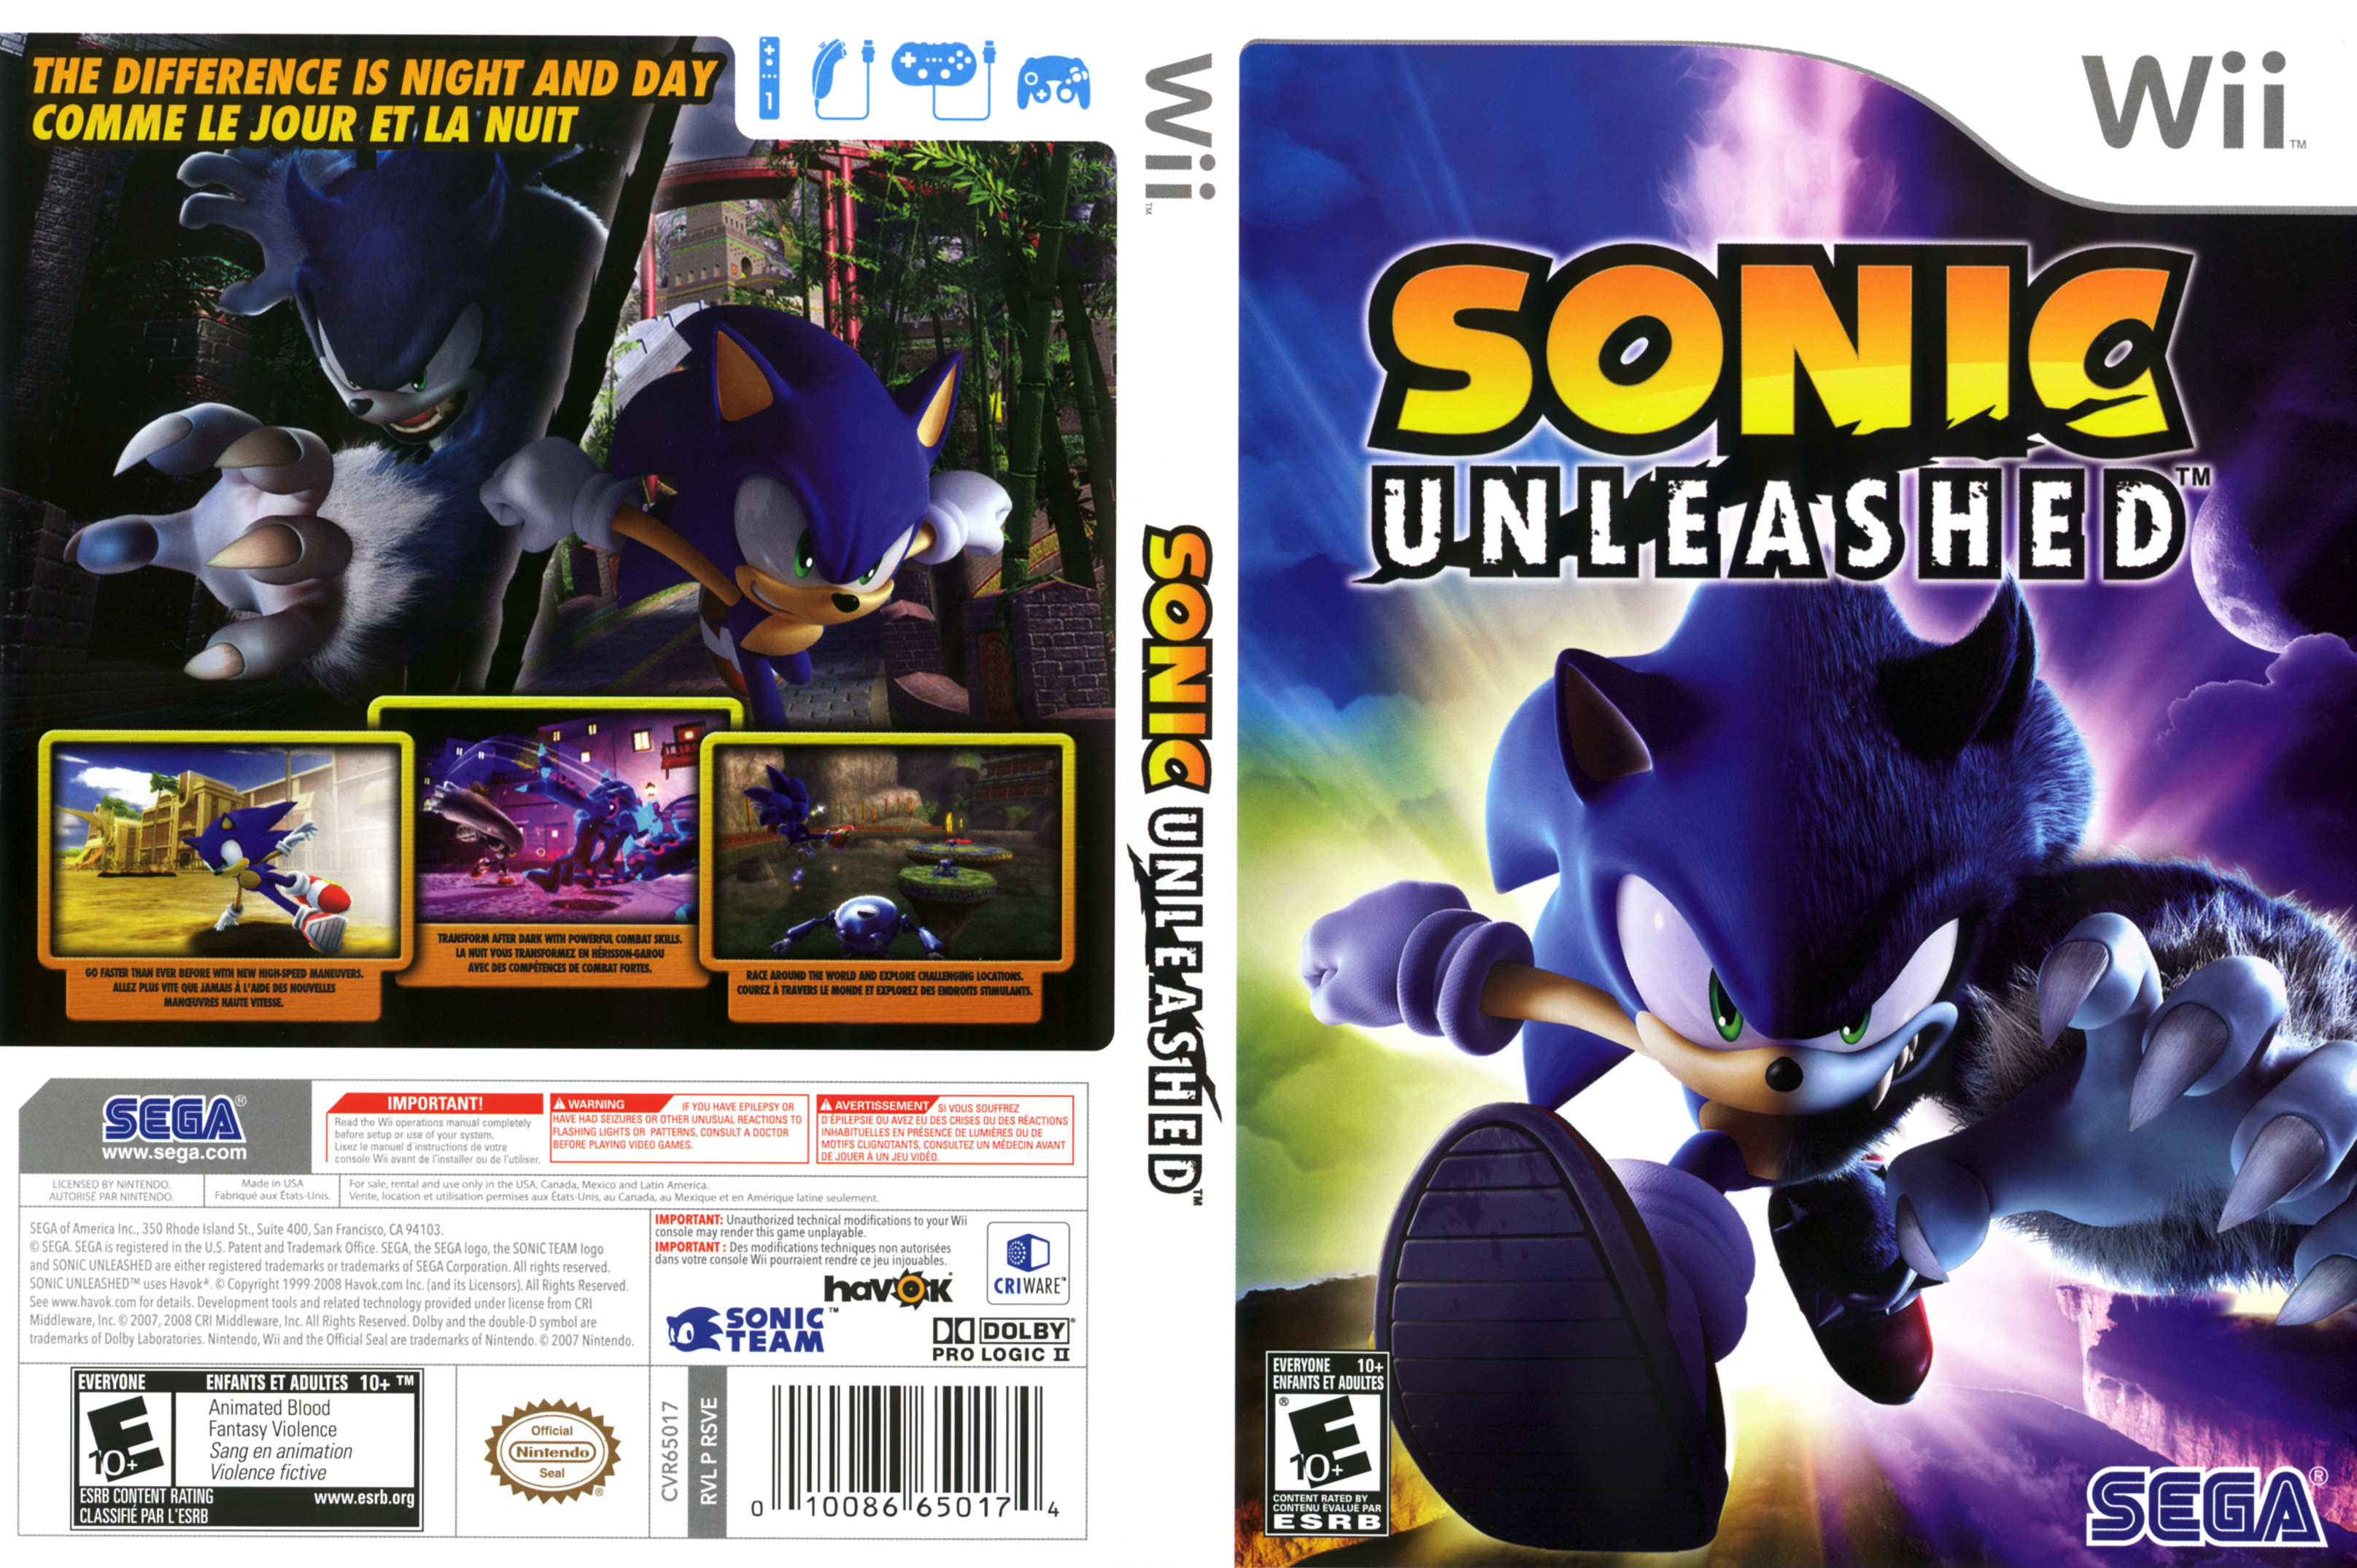 how to download sonic unleashed on wii on pc dolphin emulator